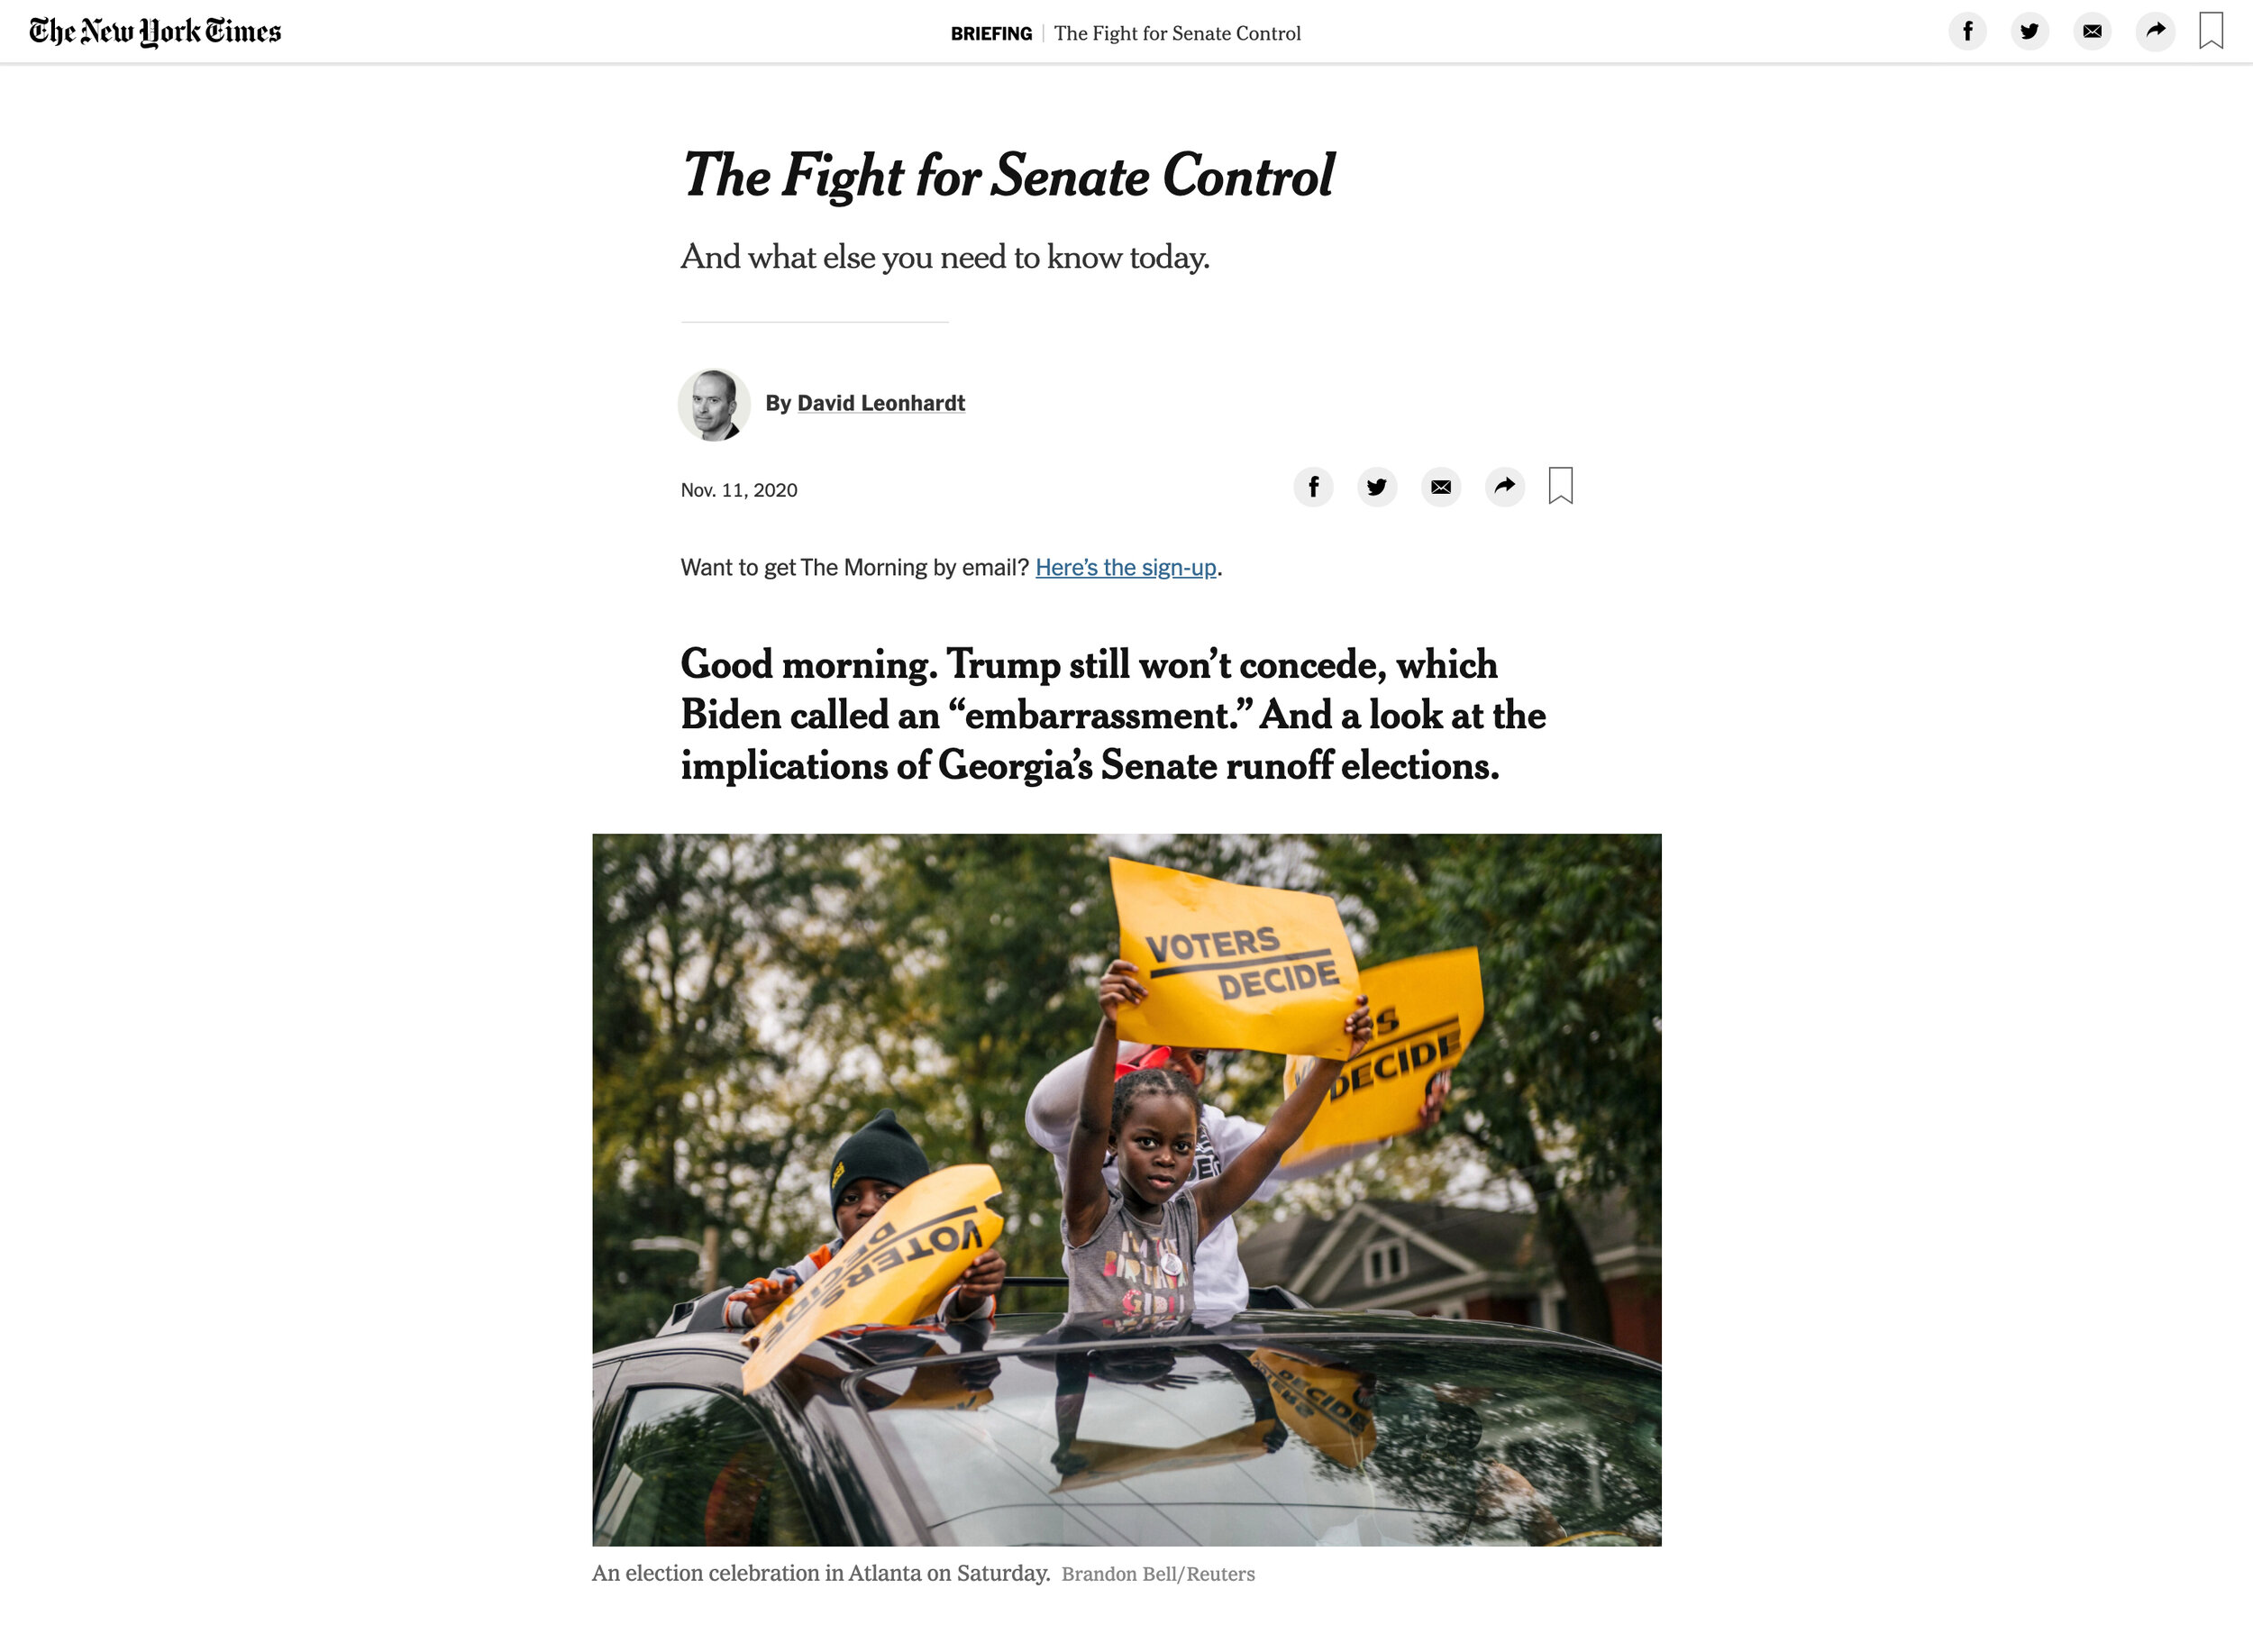 NYT_Morning_Edition_Fight_for_Senate_Control.jpg